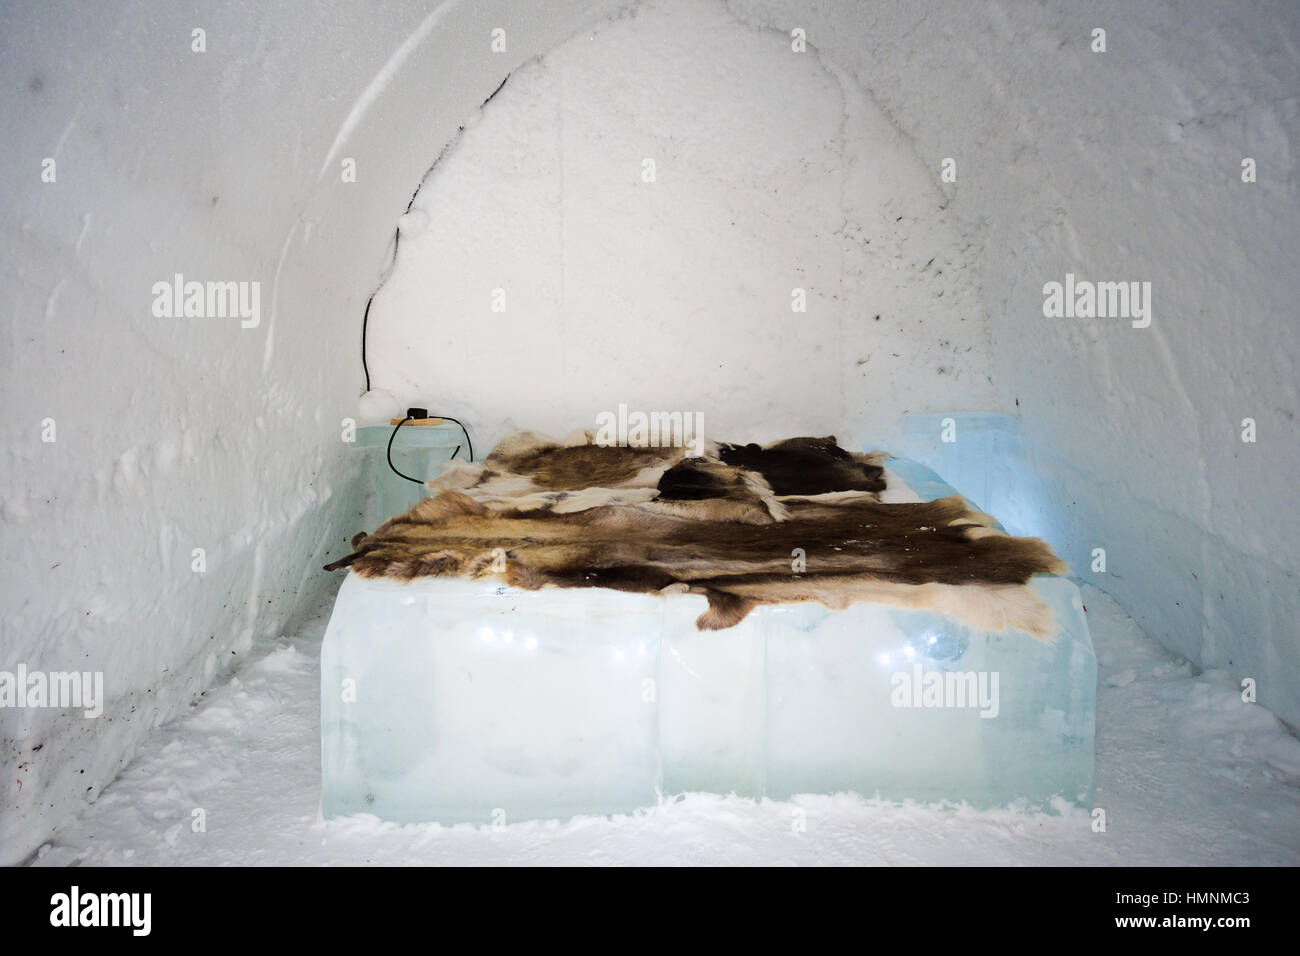 igloo interior with an ice bed and animal skin Stock Photo